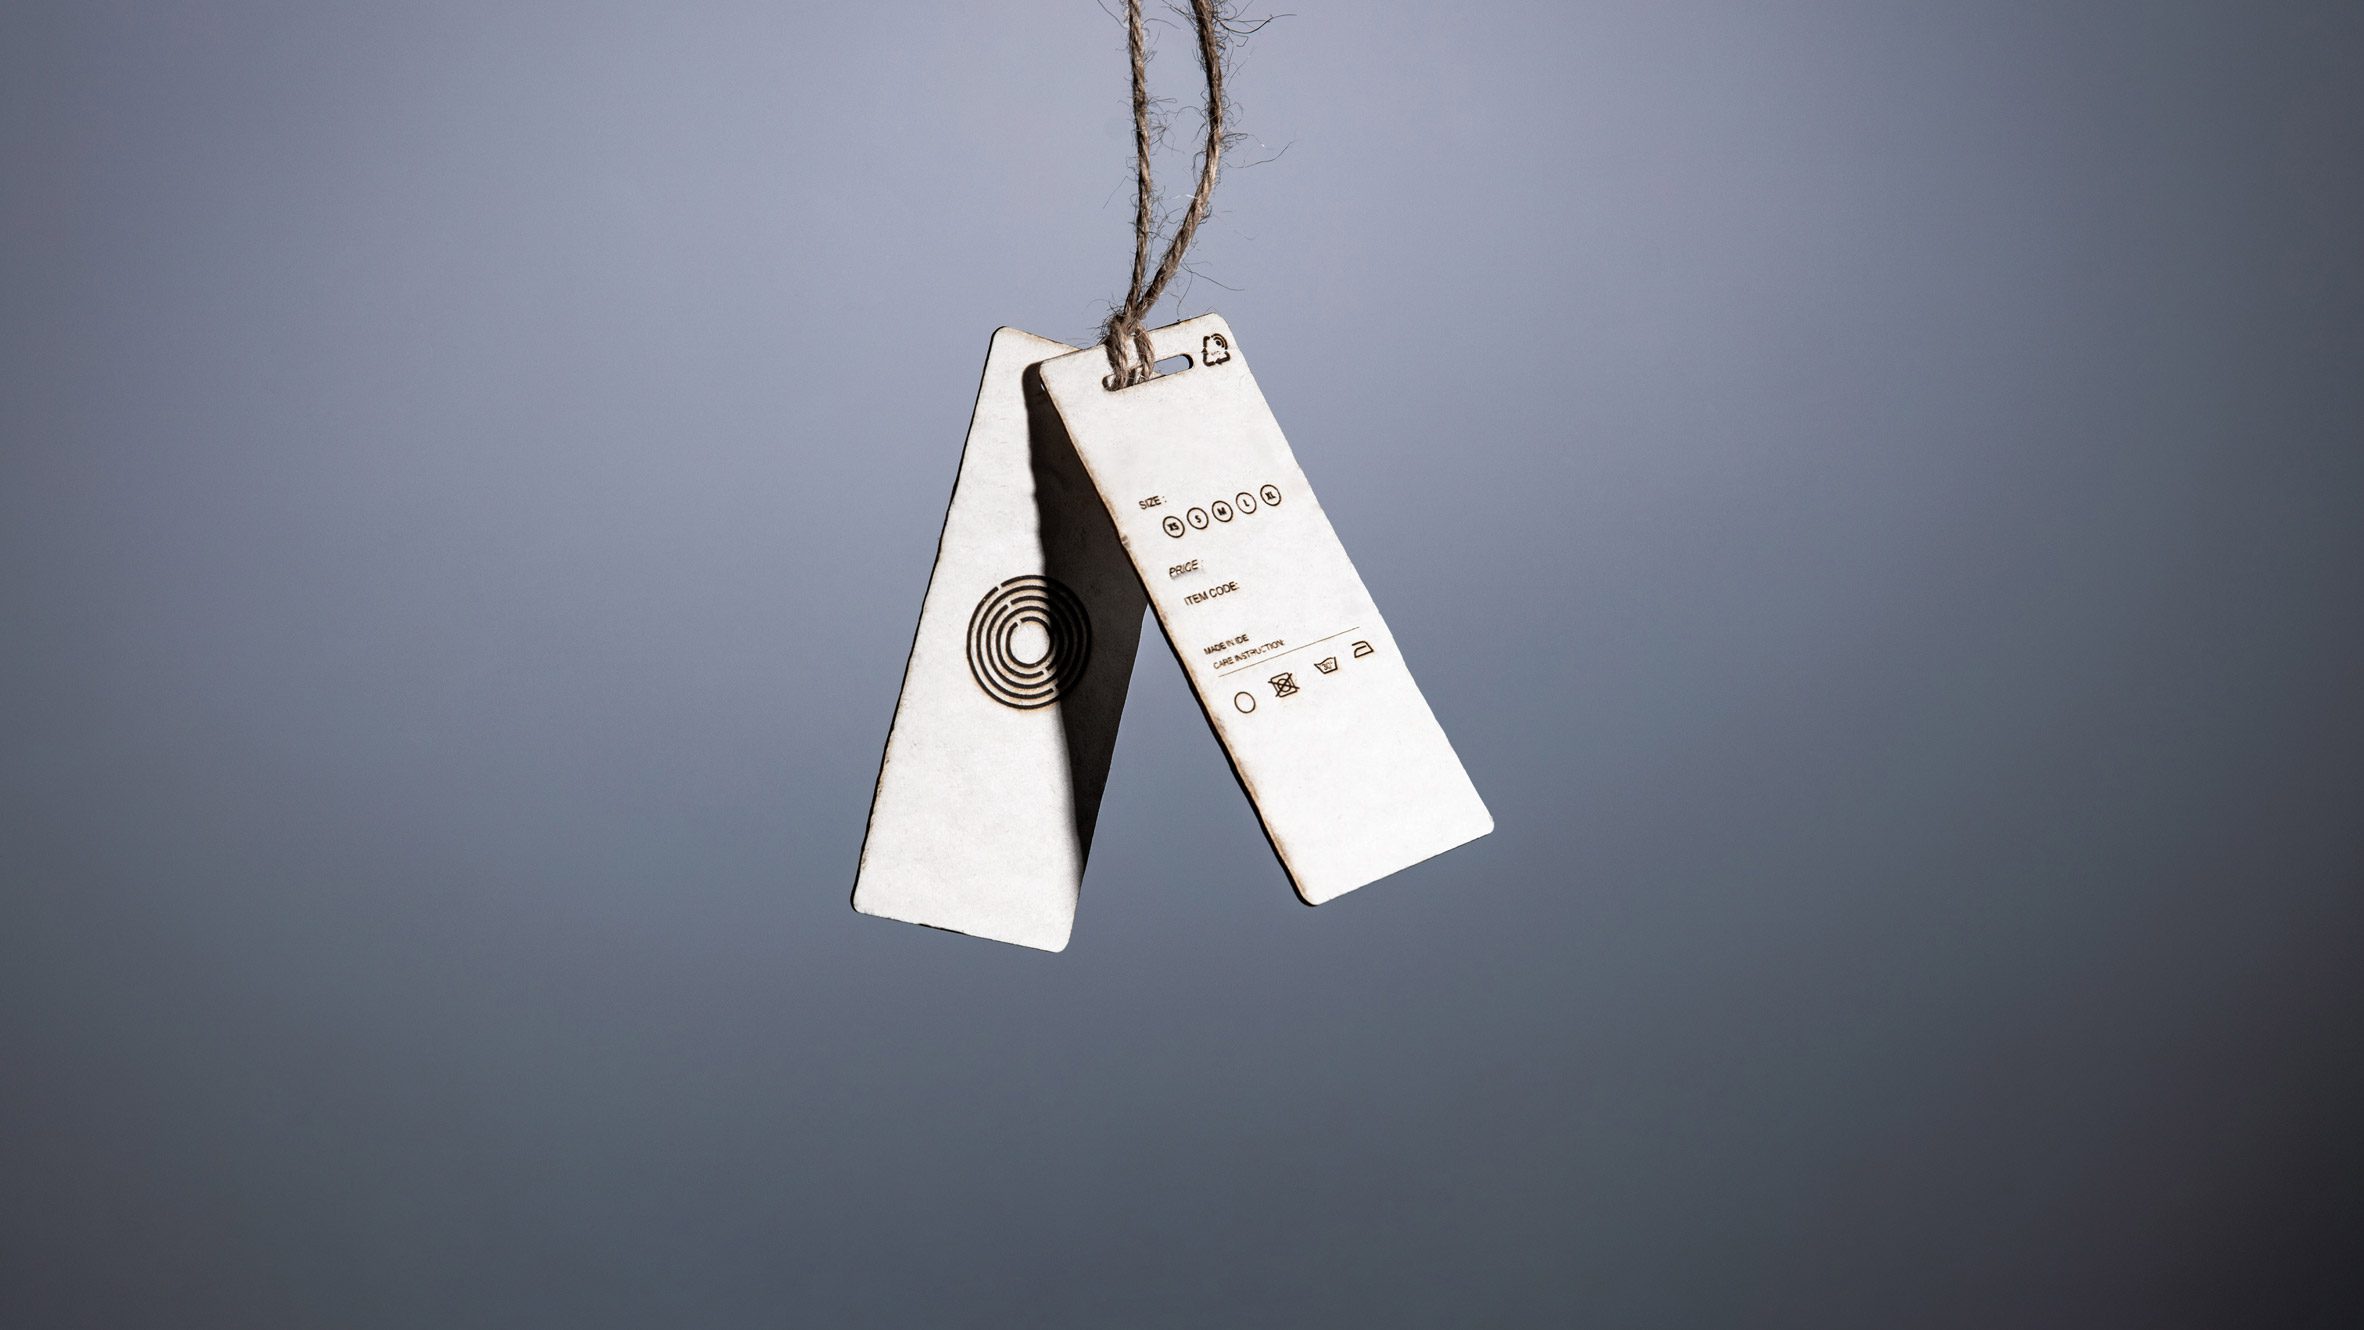 PulpaTronics tackles single-use electronics with paper RFID tags